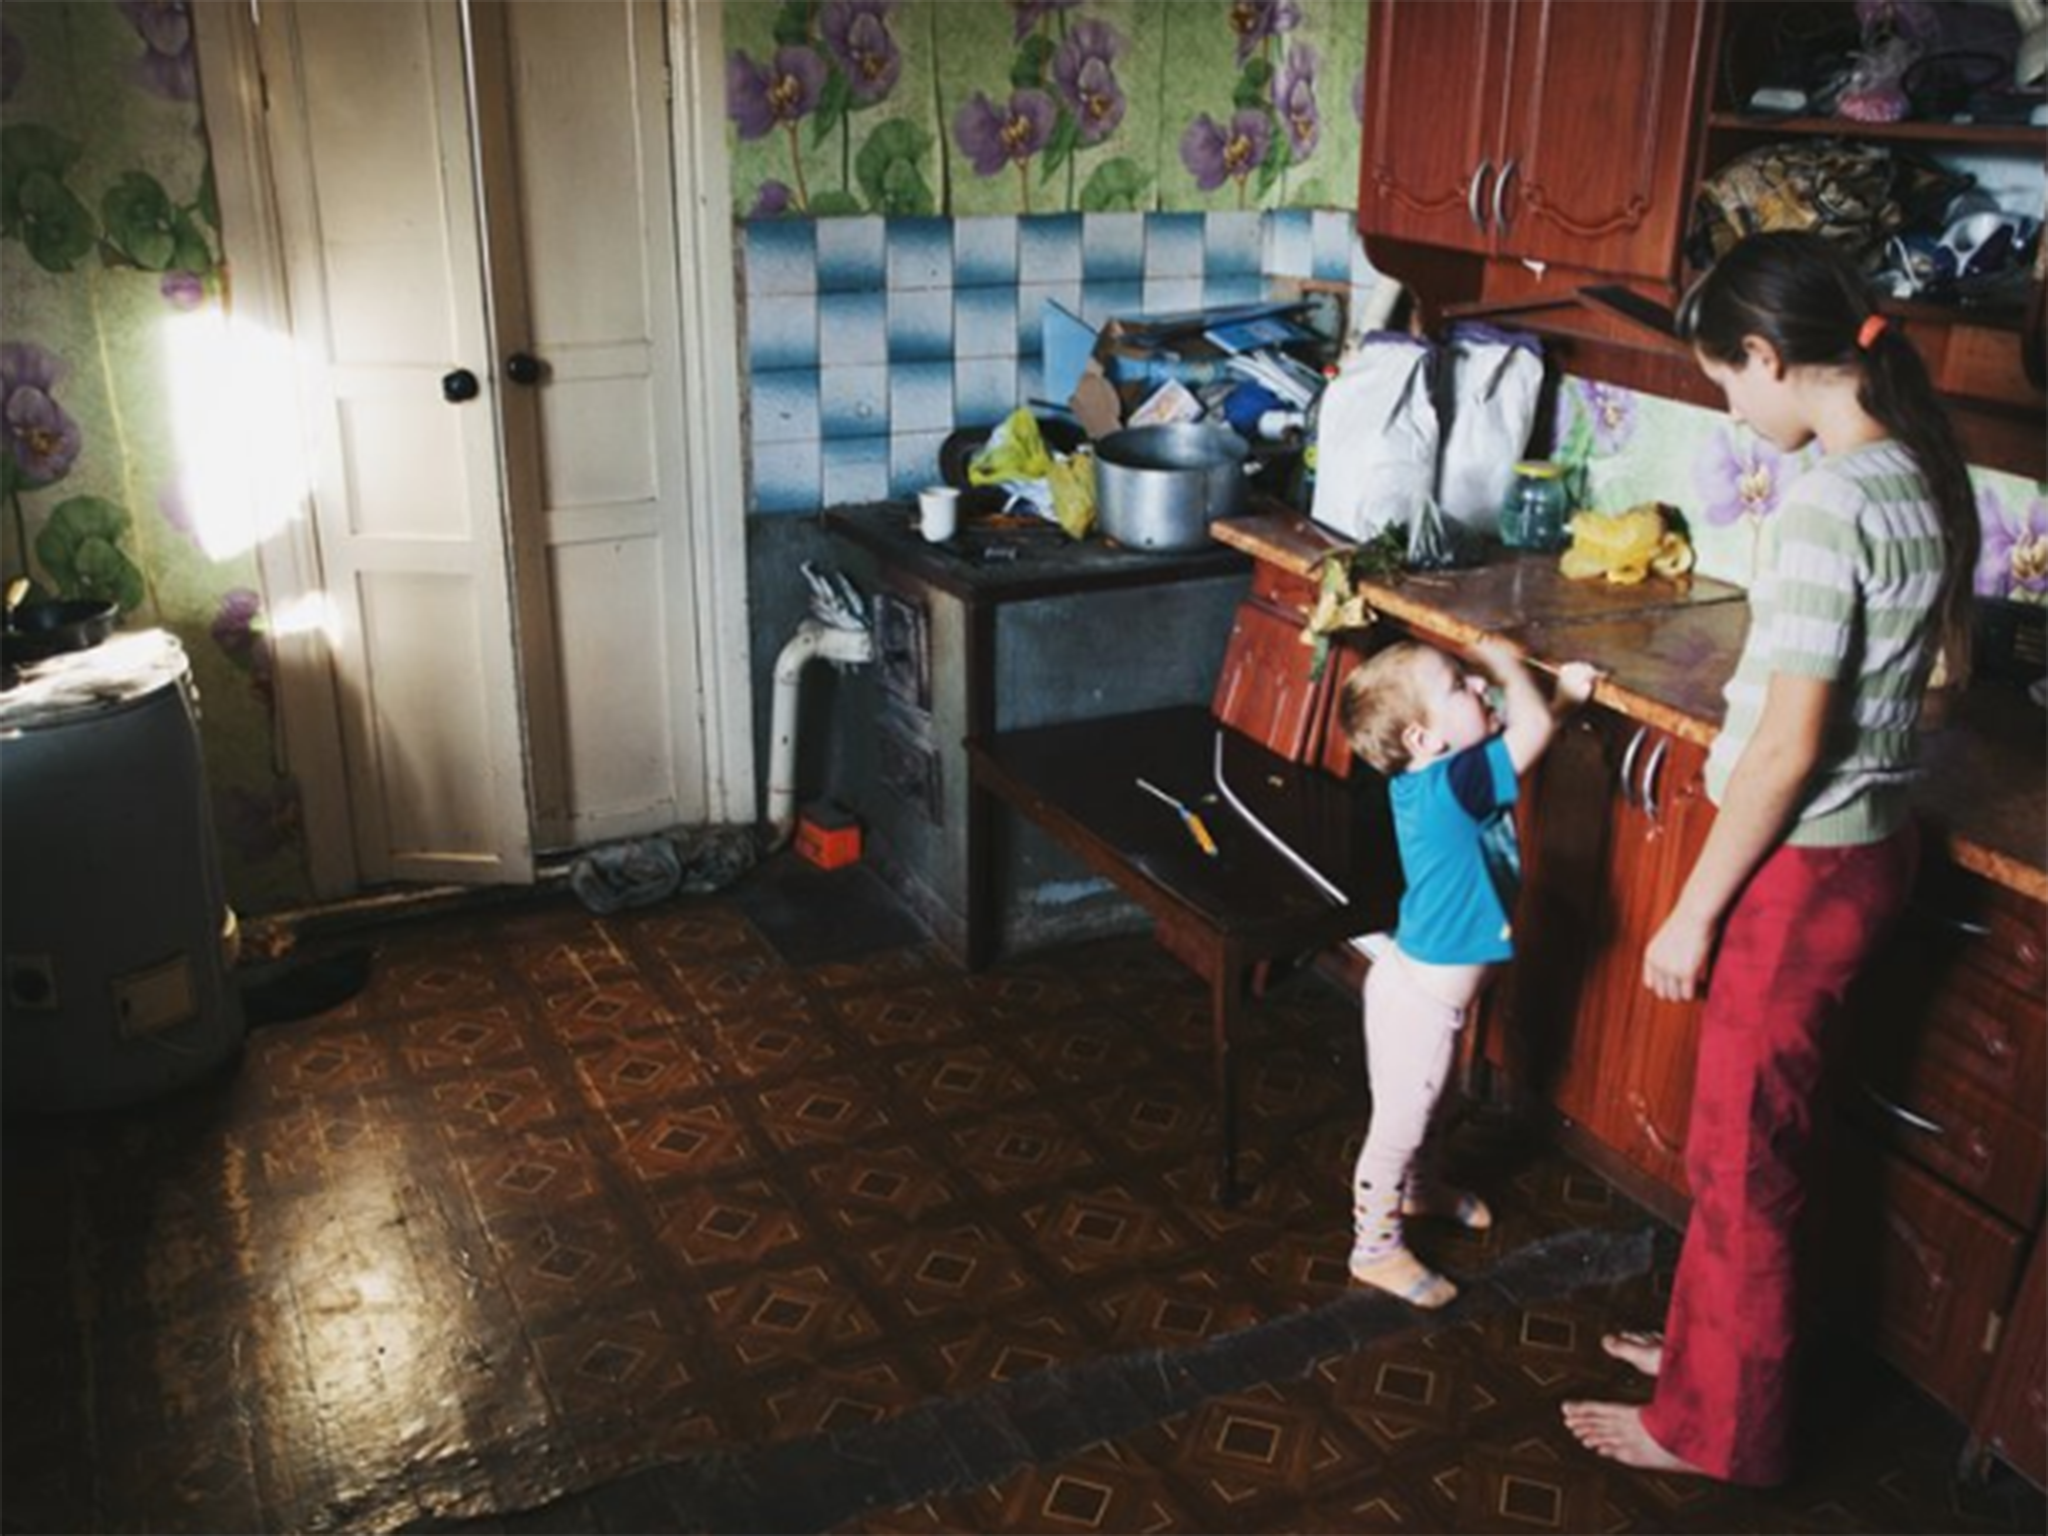 12-year-old Lisa often has to take care of her younger siblings, as well as Dima, in her mother’s place